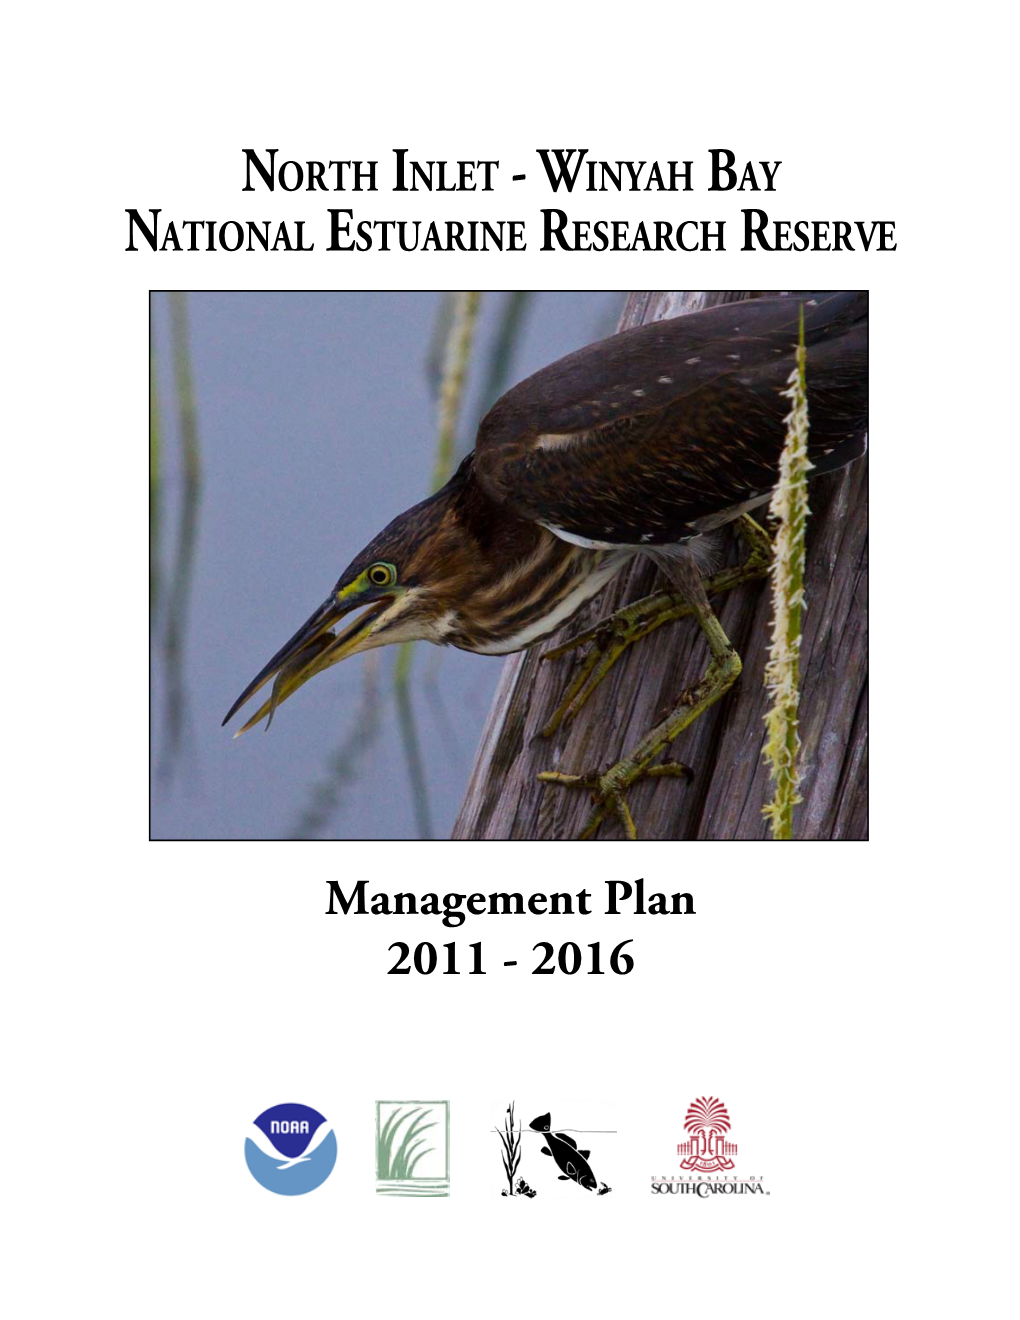 Management Plan 2011 - 2016 This Management Plan Has Been Developed in Accordance with NOAA Regulations, Including All Provisions for Public Involvement